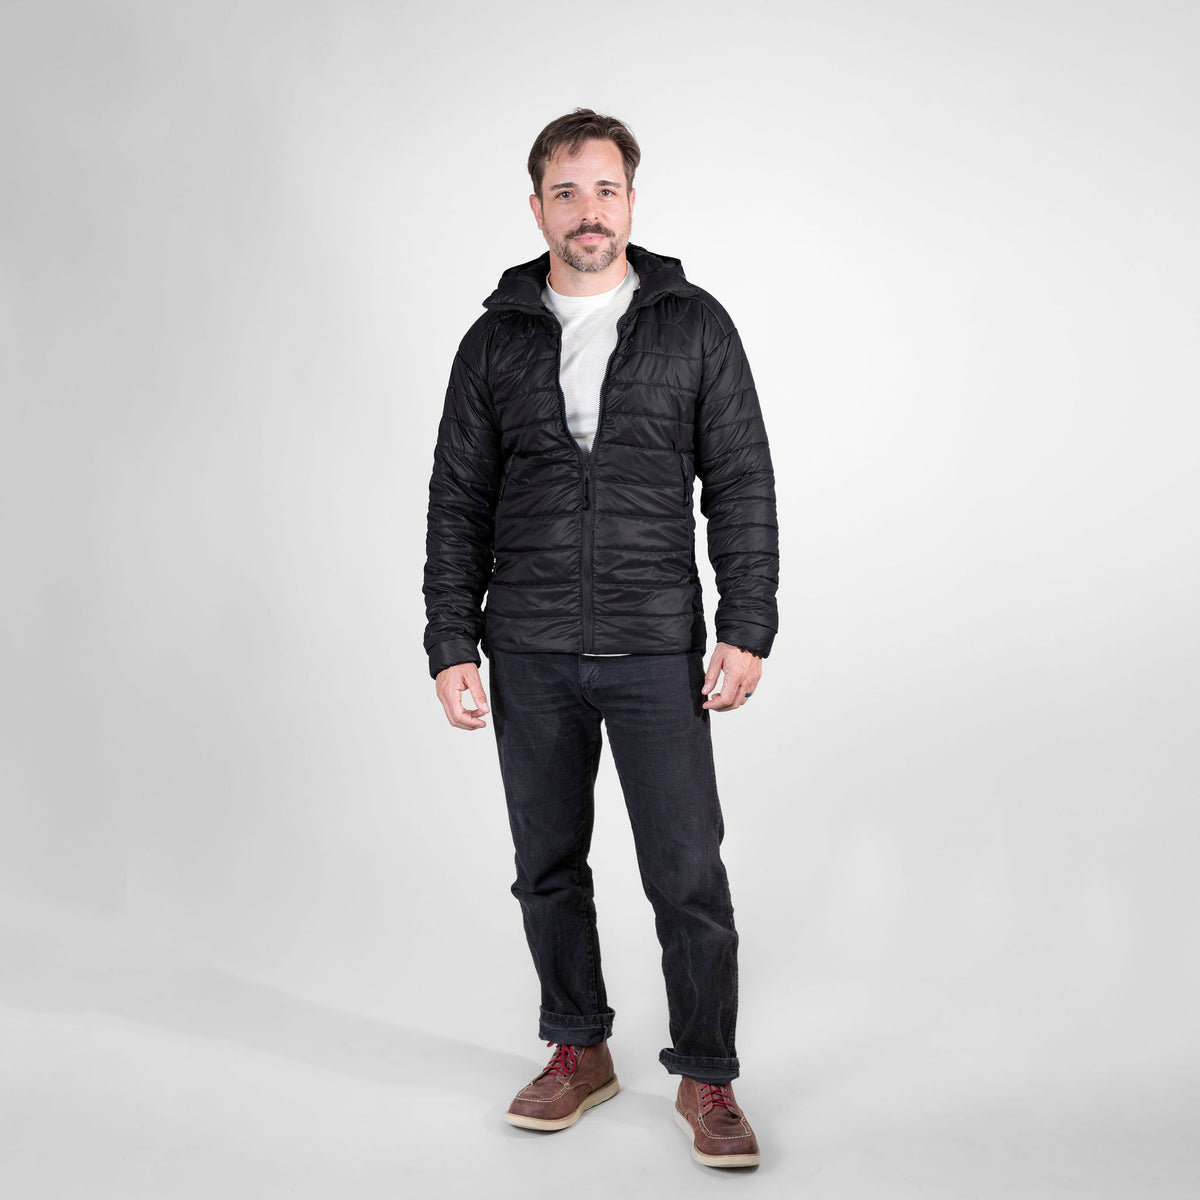 A man standing in front of a white background wearing brown boots, black jeans, a white tee shirt, and a black Alpacas of Montana men&#39;s base layer top, and a Alpacas of Montana warm top layer insulated cozy comfortable thermal winter outerwear heavyweight alpaca wool lined men&#39;s mismi coat jacket parka for skiing, snowboarding, ice fishing, hunting, camping, arctic, travel, outdoors